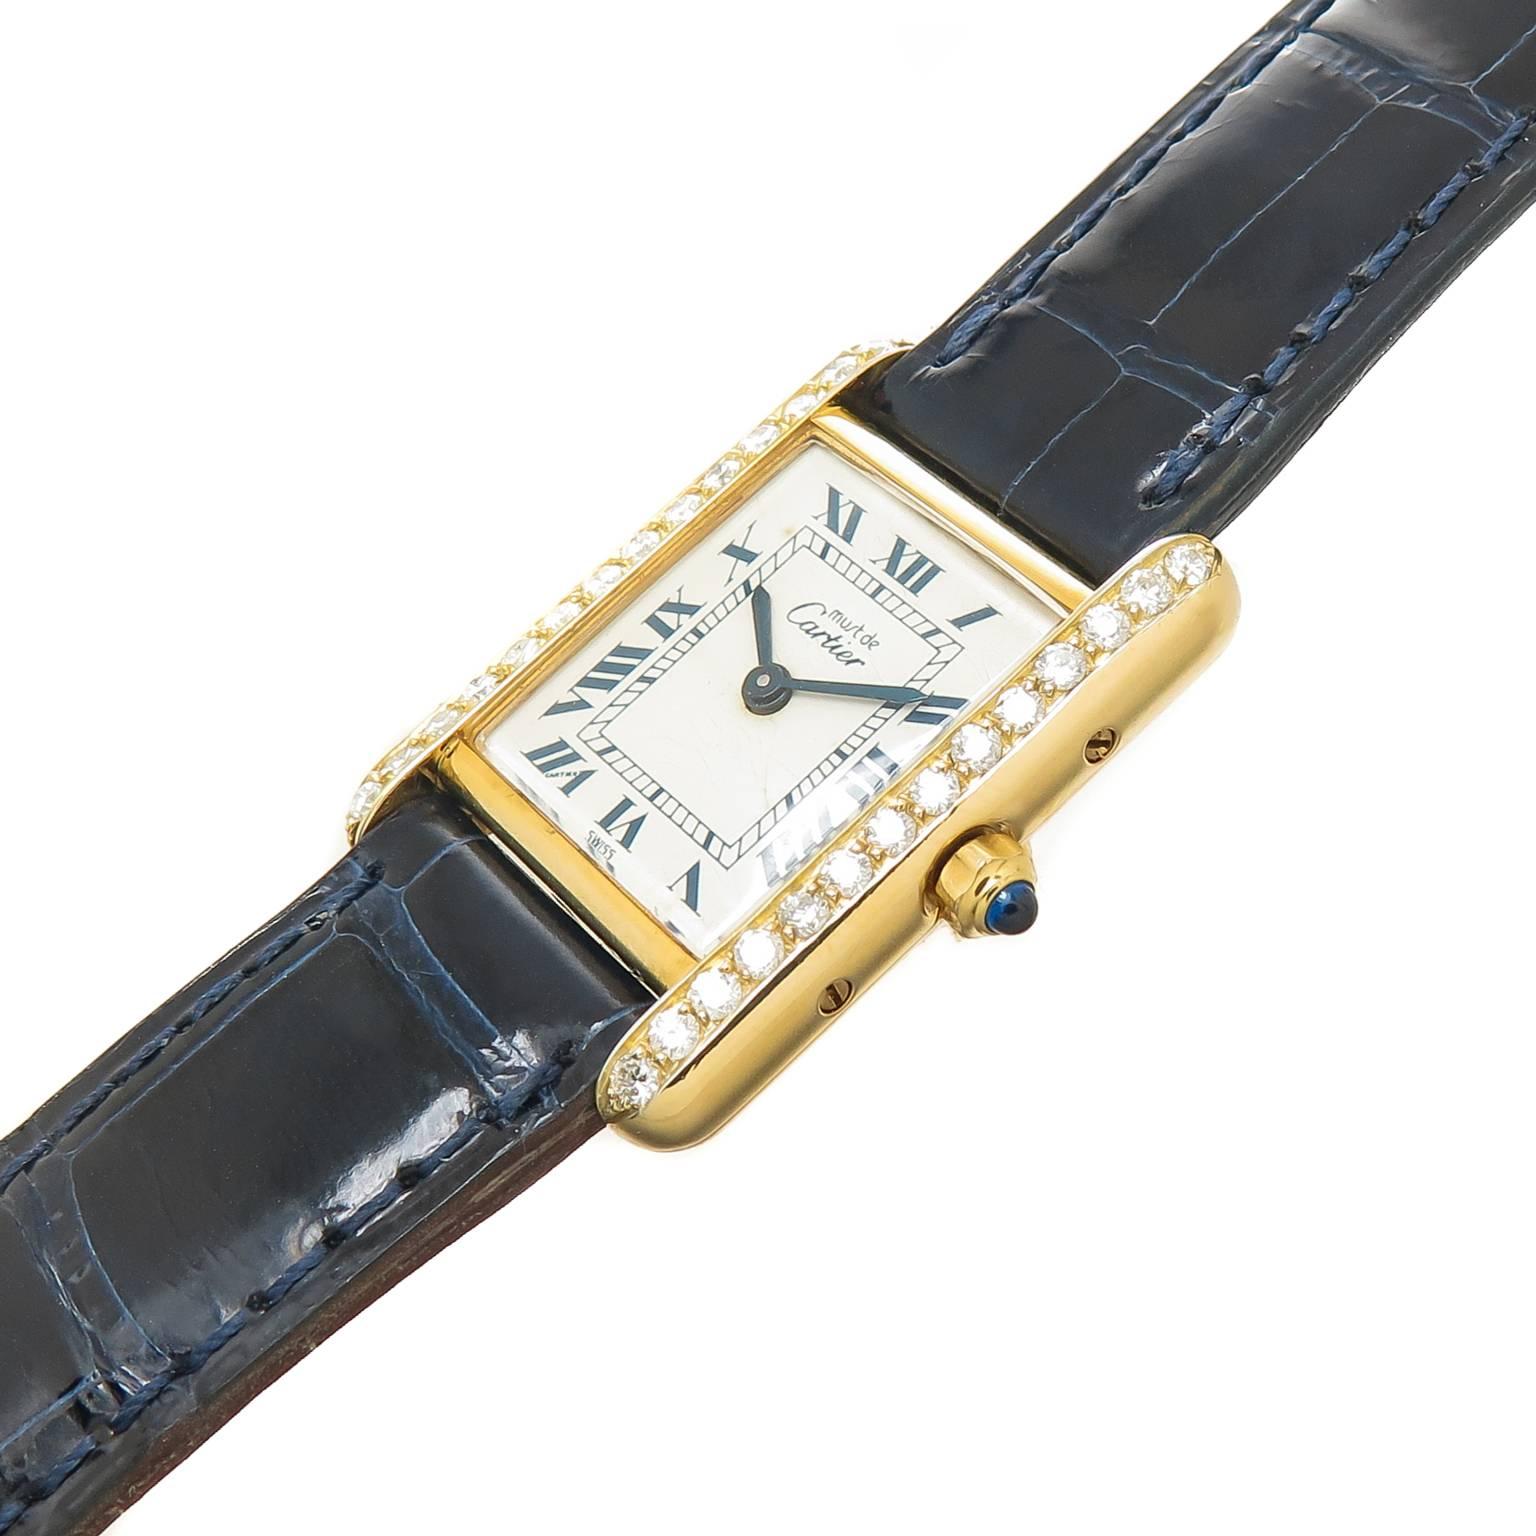 Circa 2000 Cartier, Must de Cartier Classic Tank Watch 28 X 20 MM mid size Vermeil  Gold Plate on Sterling Silver water resistant case. Set with Round Brilliant cut Diamonds totaling .58 Carat. Quartz Movement, White Dial with Blue Roman Numerals,